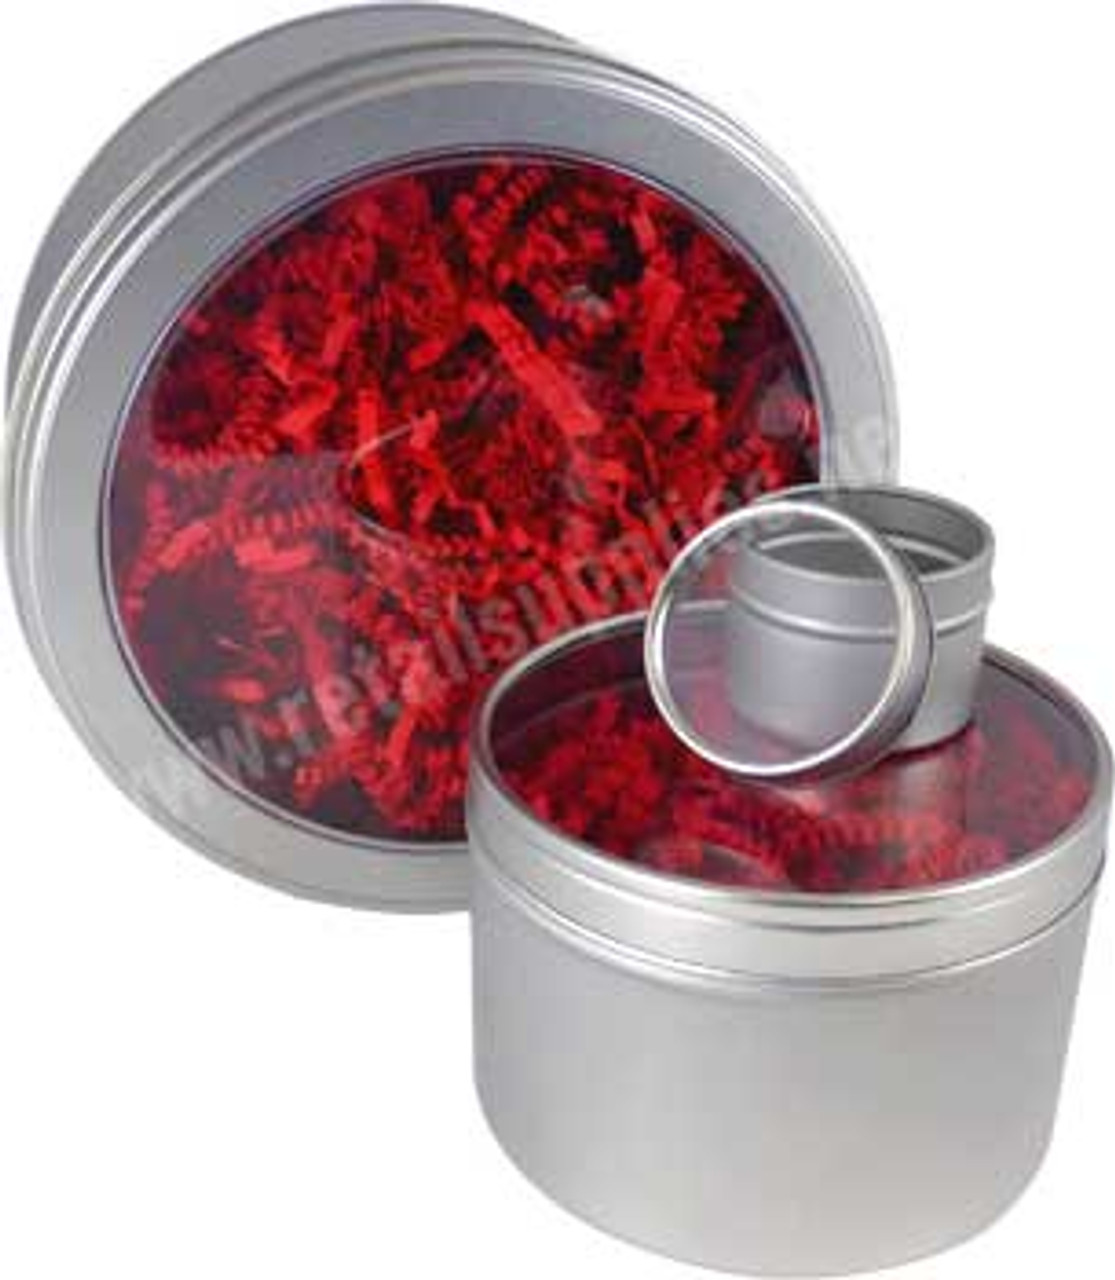 1-1/2" diam. x 1 Round Tins with Clear twist on lid - ea.